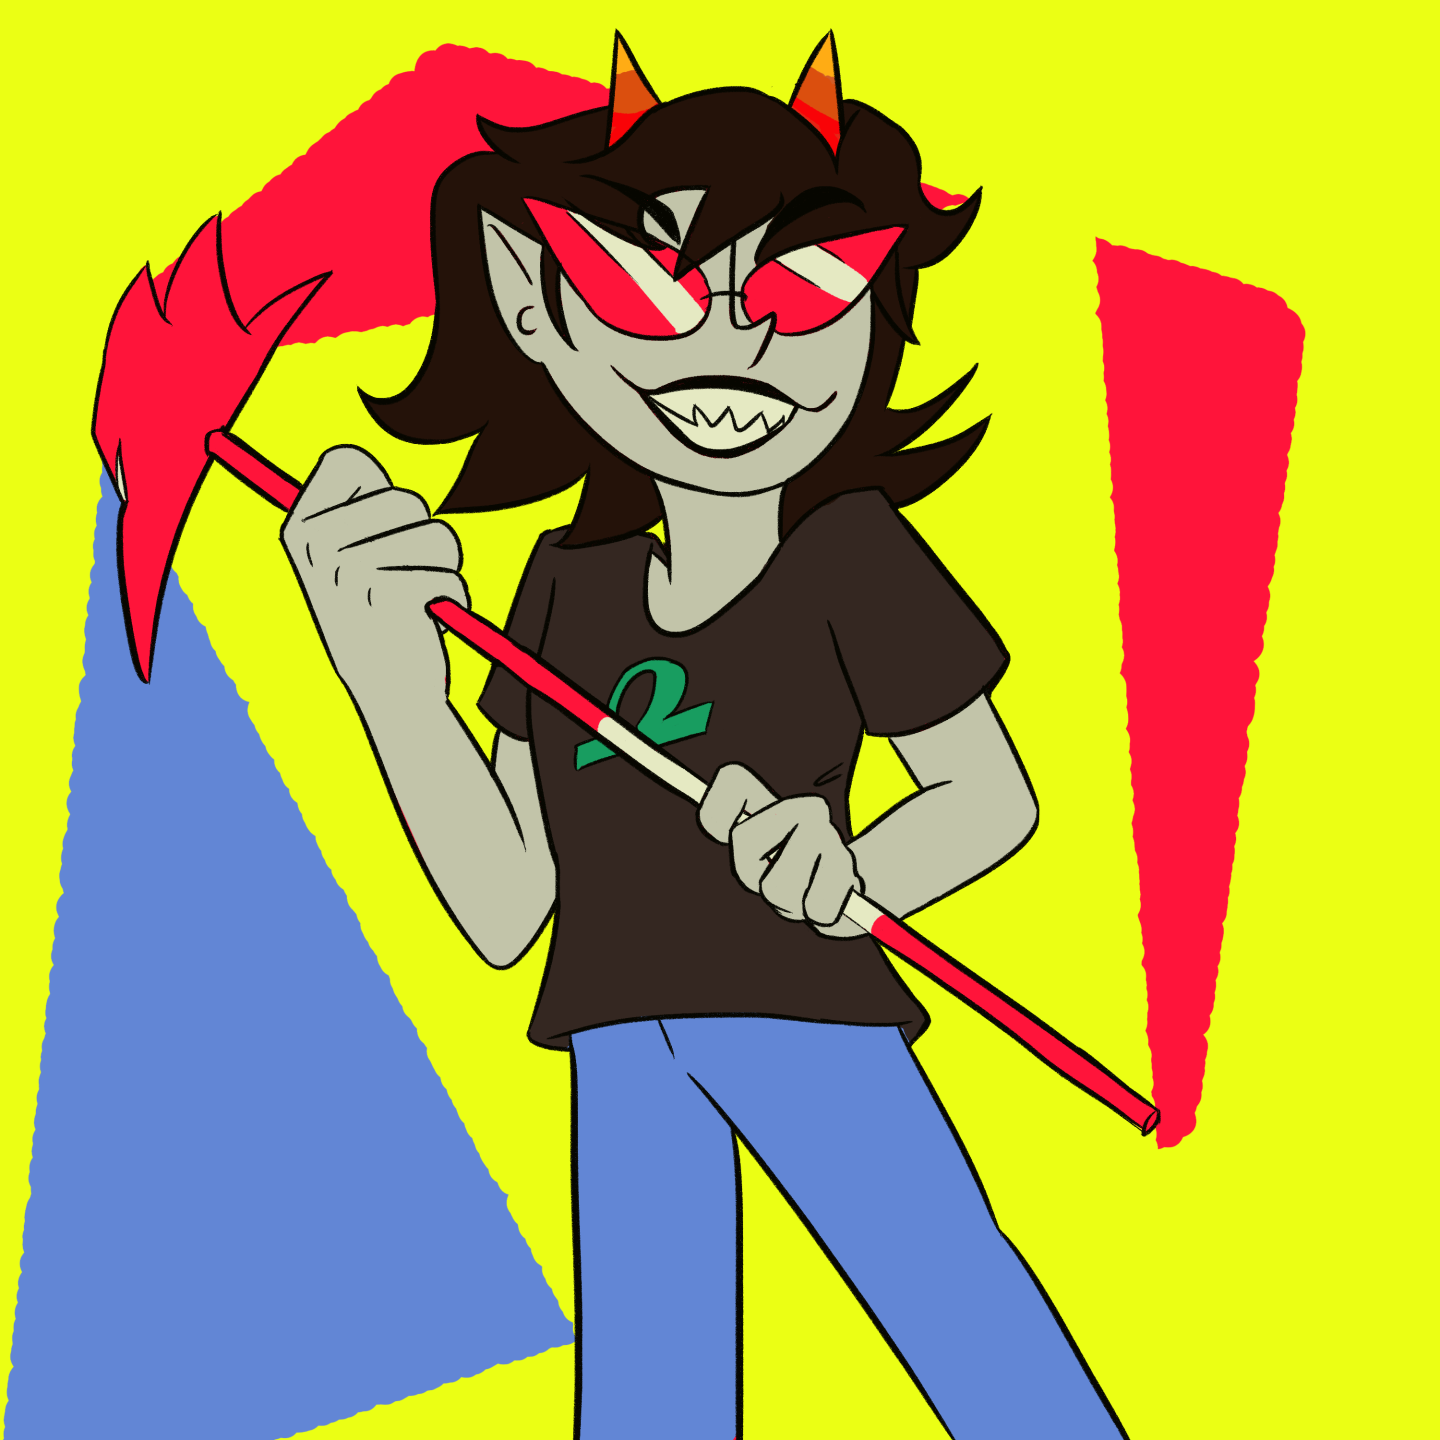 terezi pyrope standing confidently with her dragon cane.